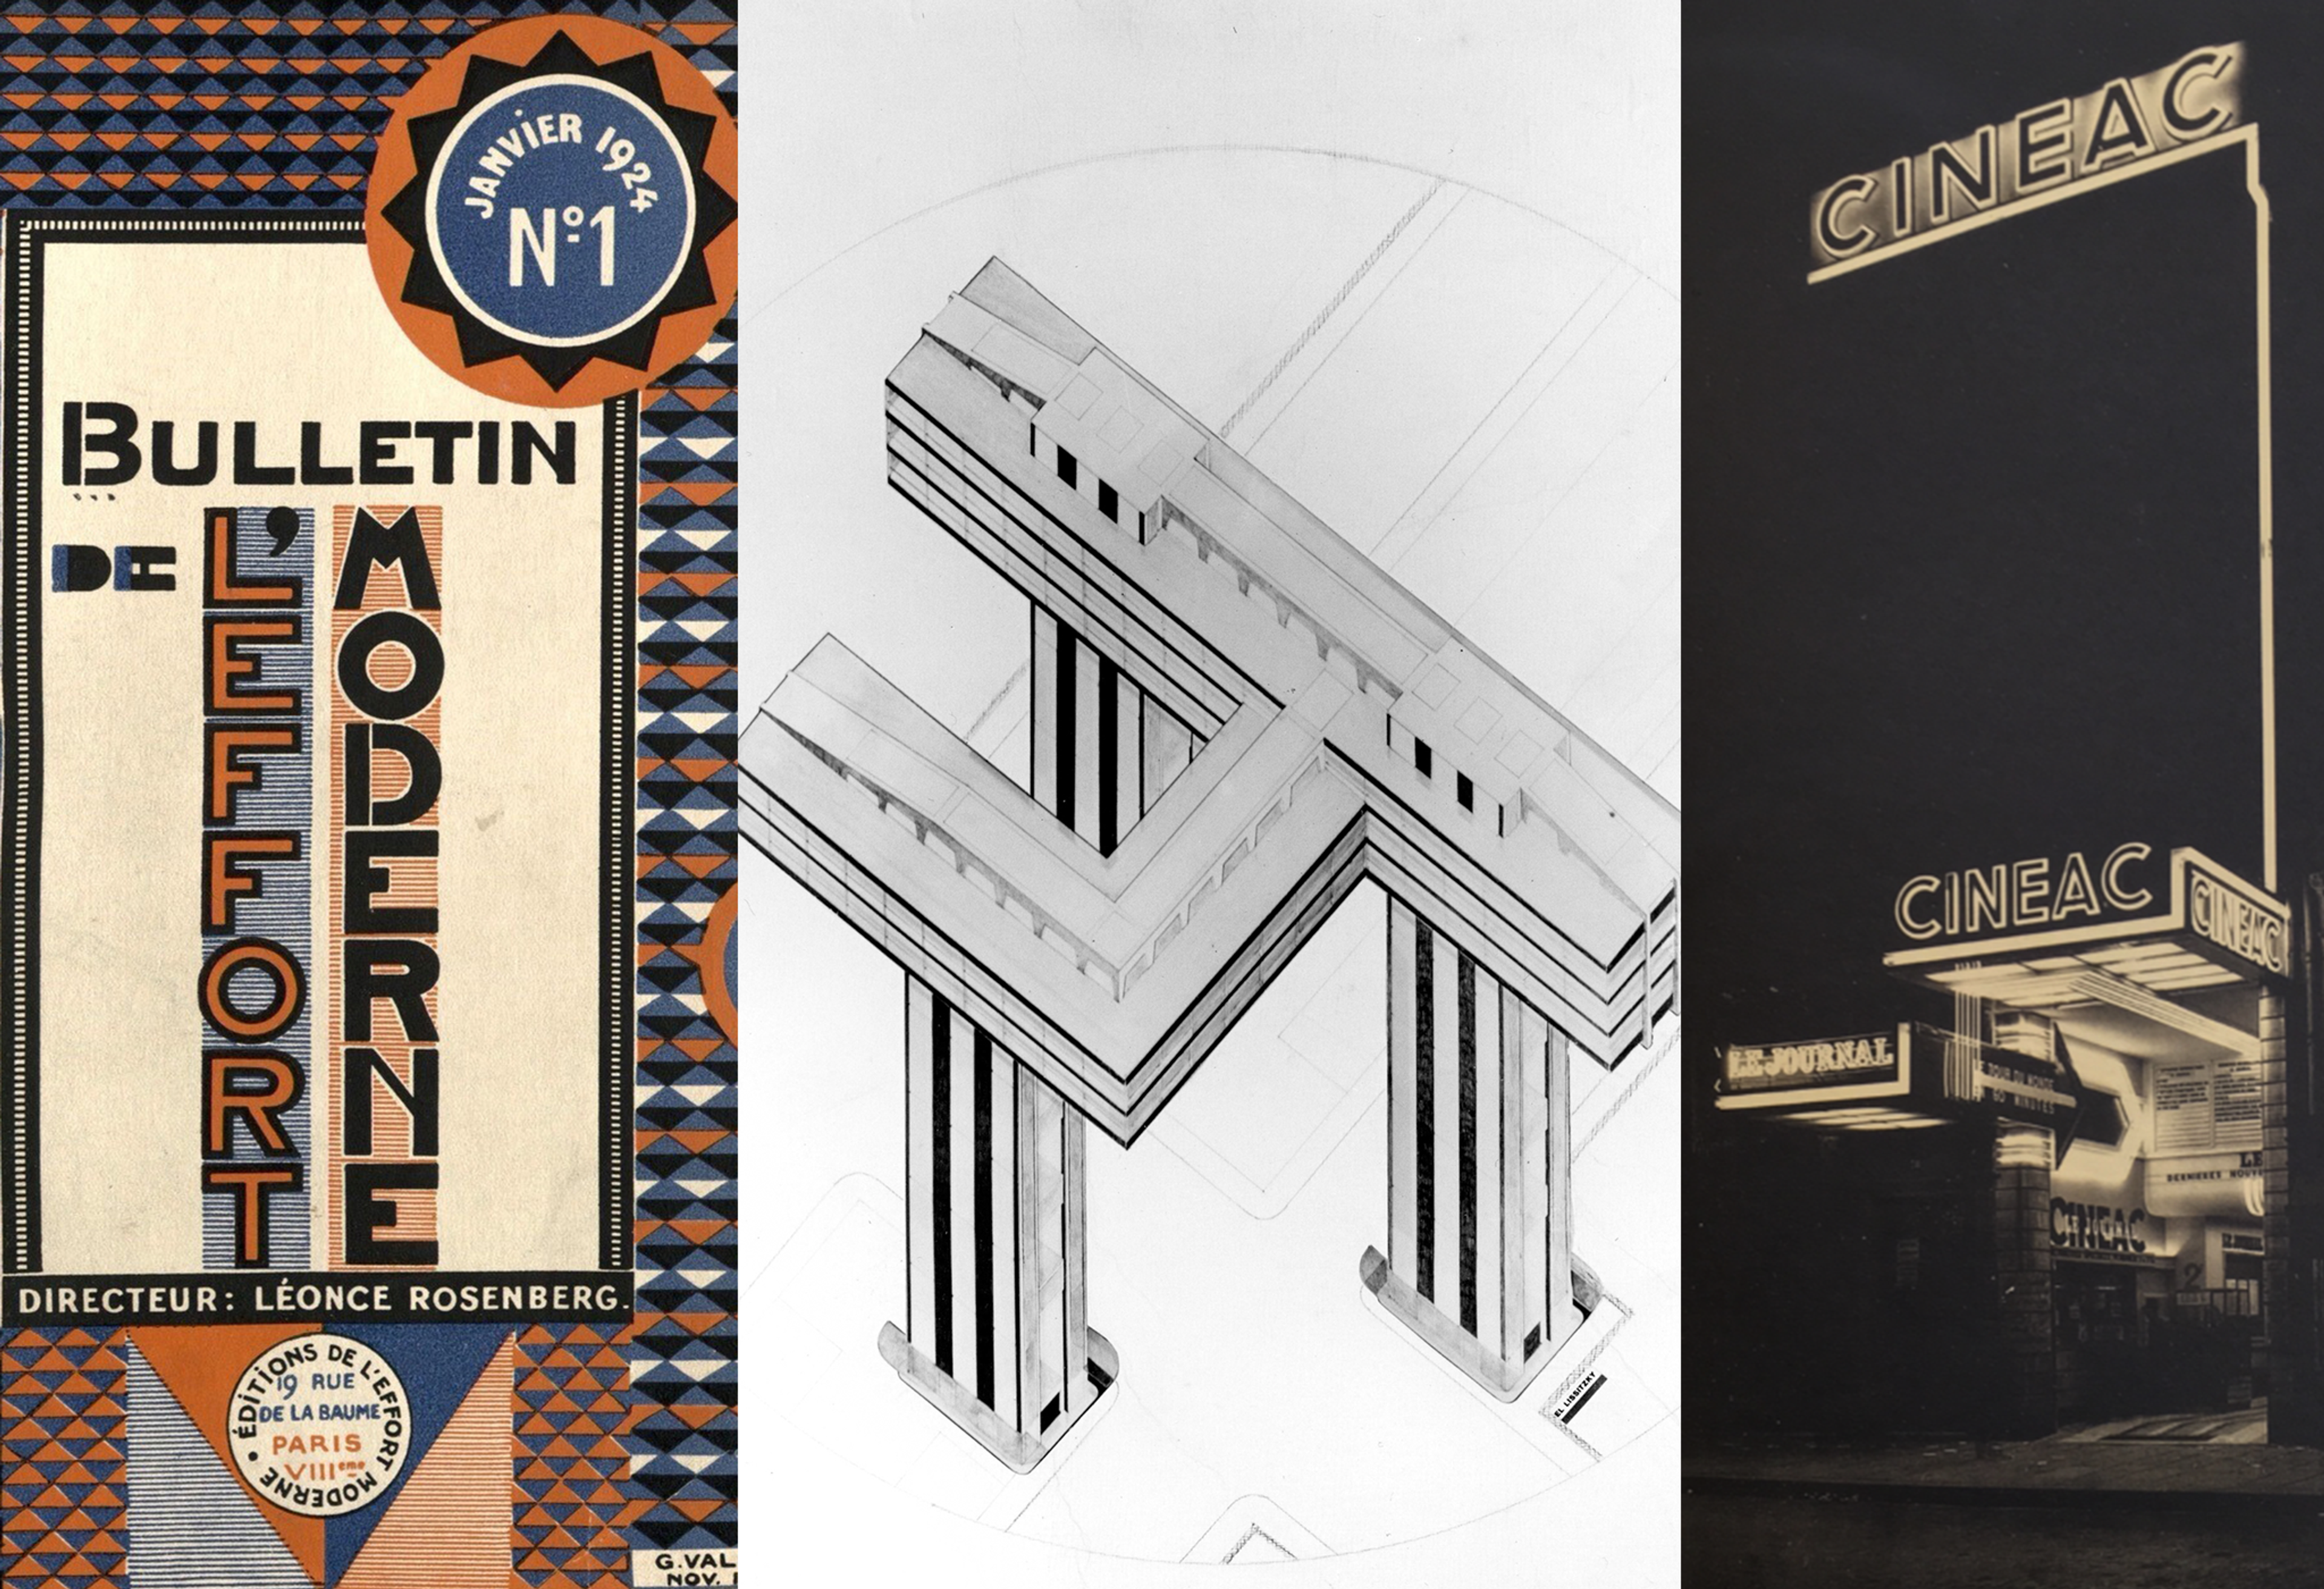 Three book covers, one reading "Bulletin de L'Effort Moderne", one building illustration, and one old cinema